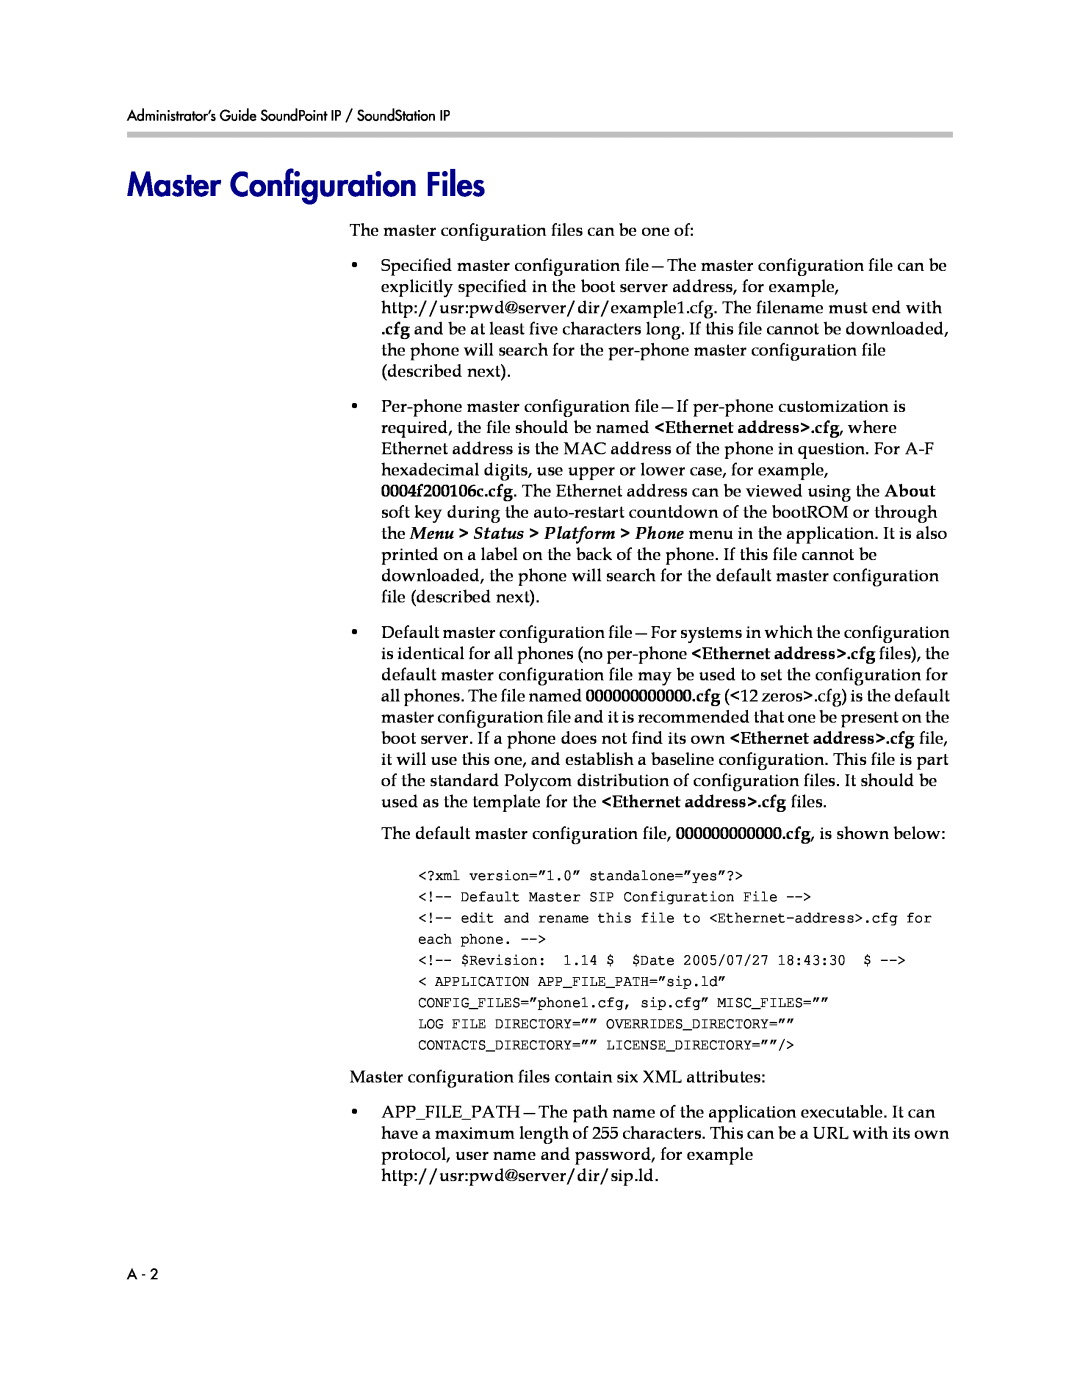 Polycom SIP 3.1 Master Configuration Files, ?xml version=”1.0” standalone=”yes”?, Default Master SIP Configuration File 